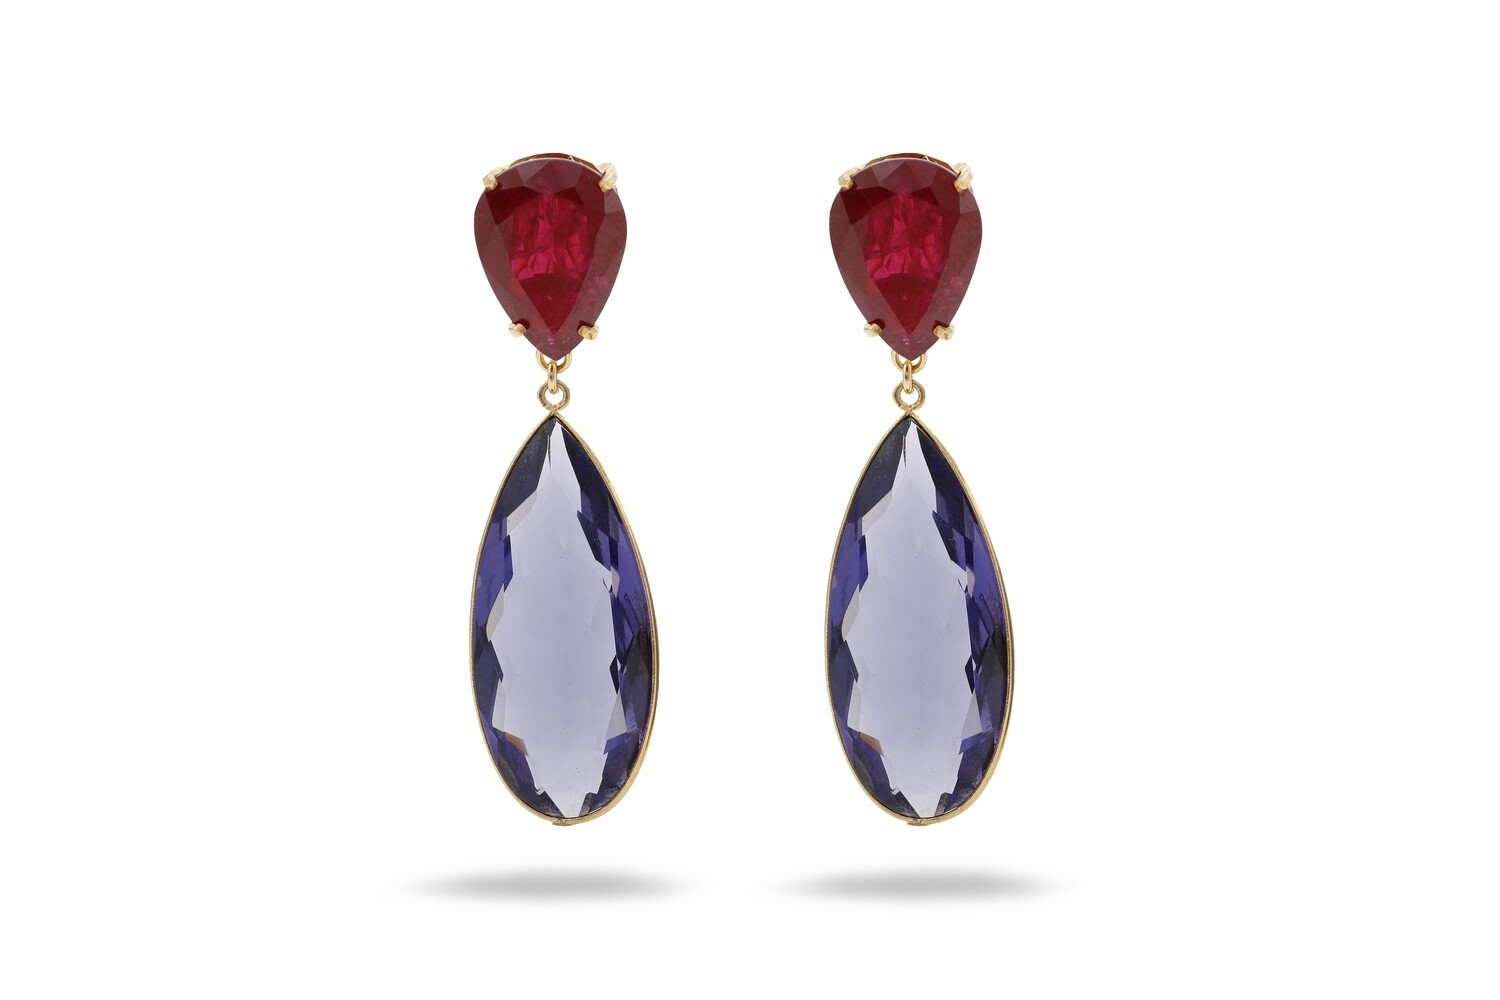 KANDY in red Agate and Zirconium gemstones